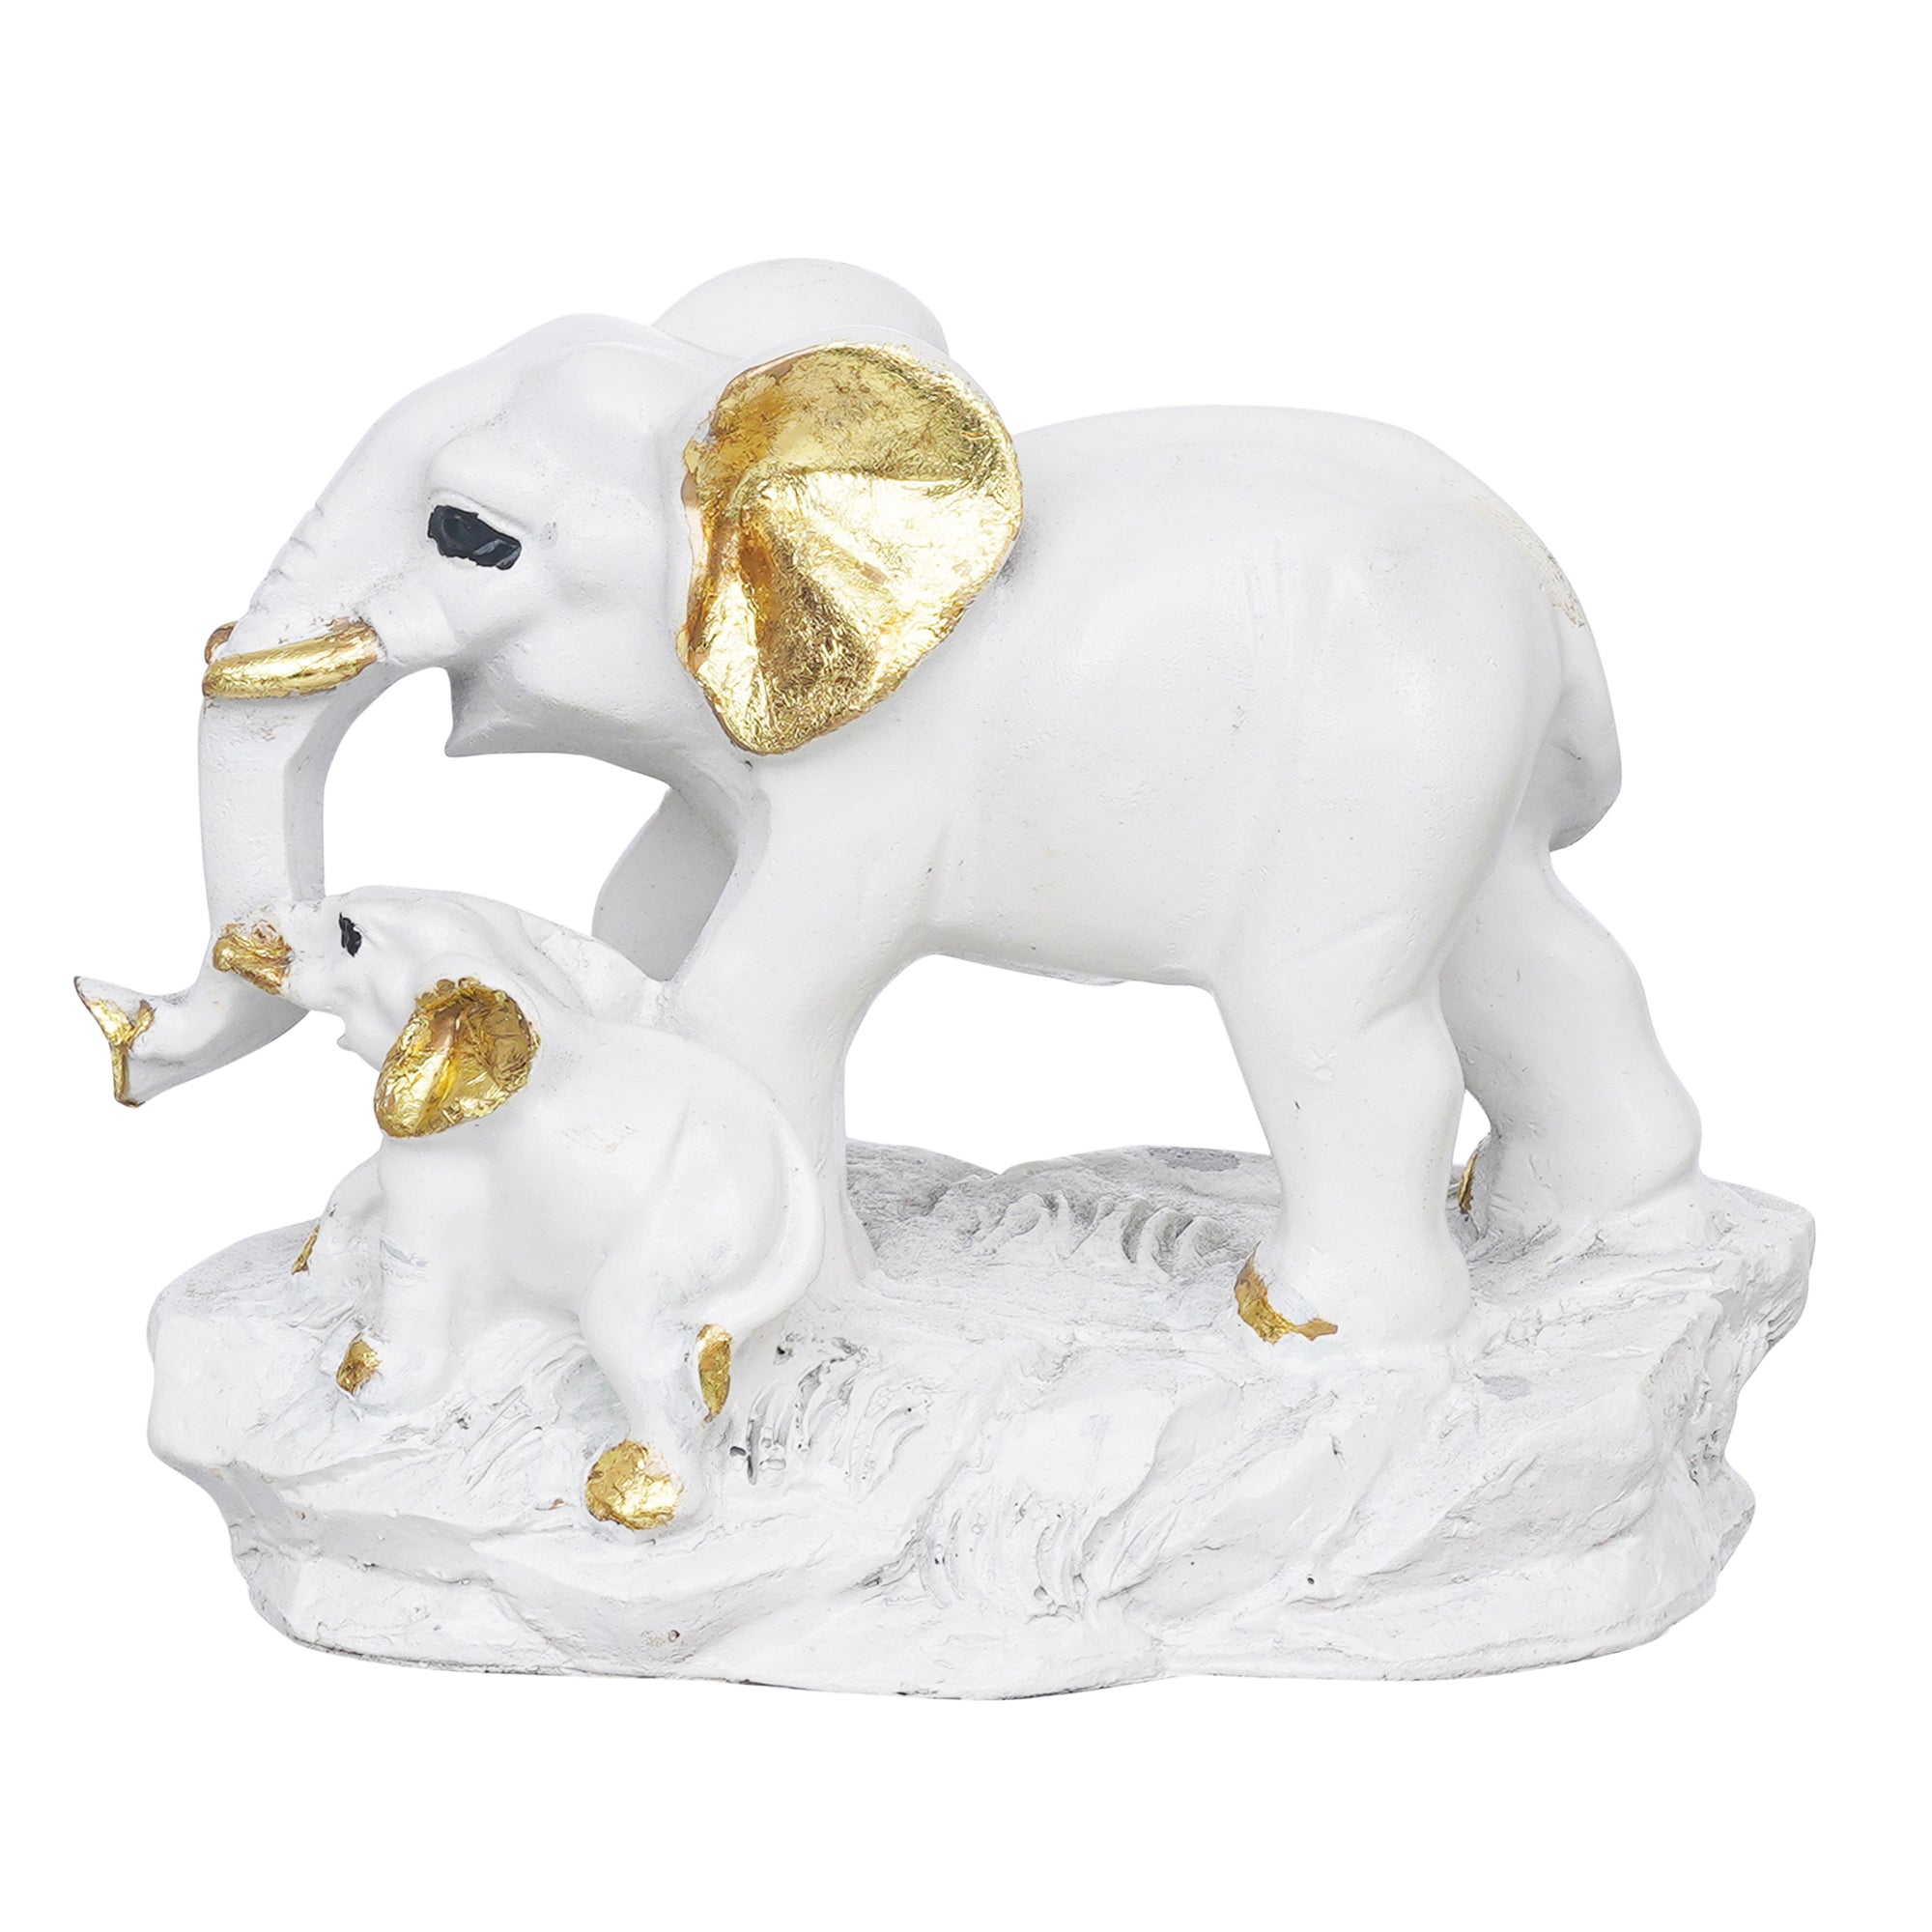 eCraftIndia White and Golden Cute Elephant with Baby Elephant Statues Animal Figurines Decorative Showpieces for Home Decor 2